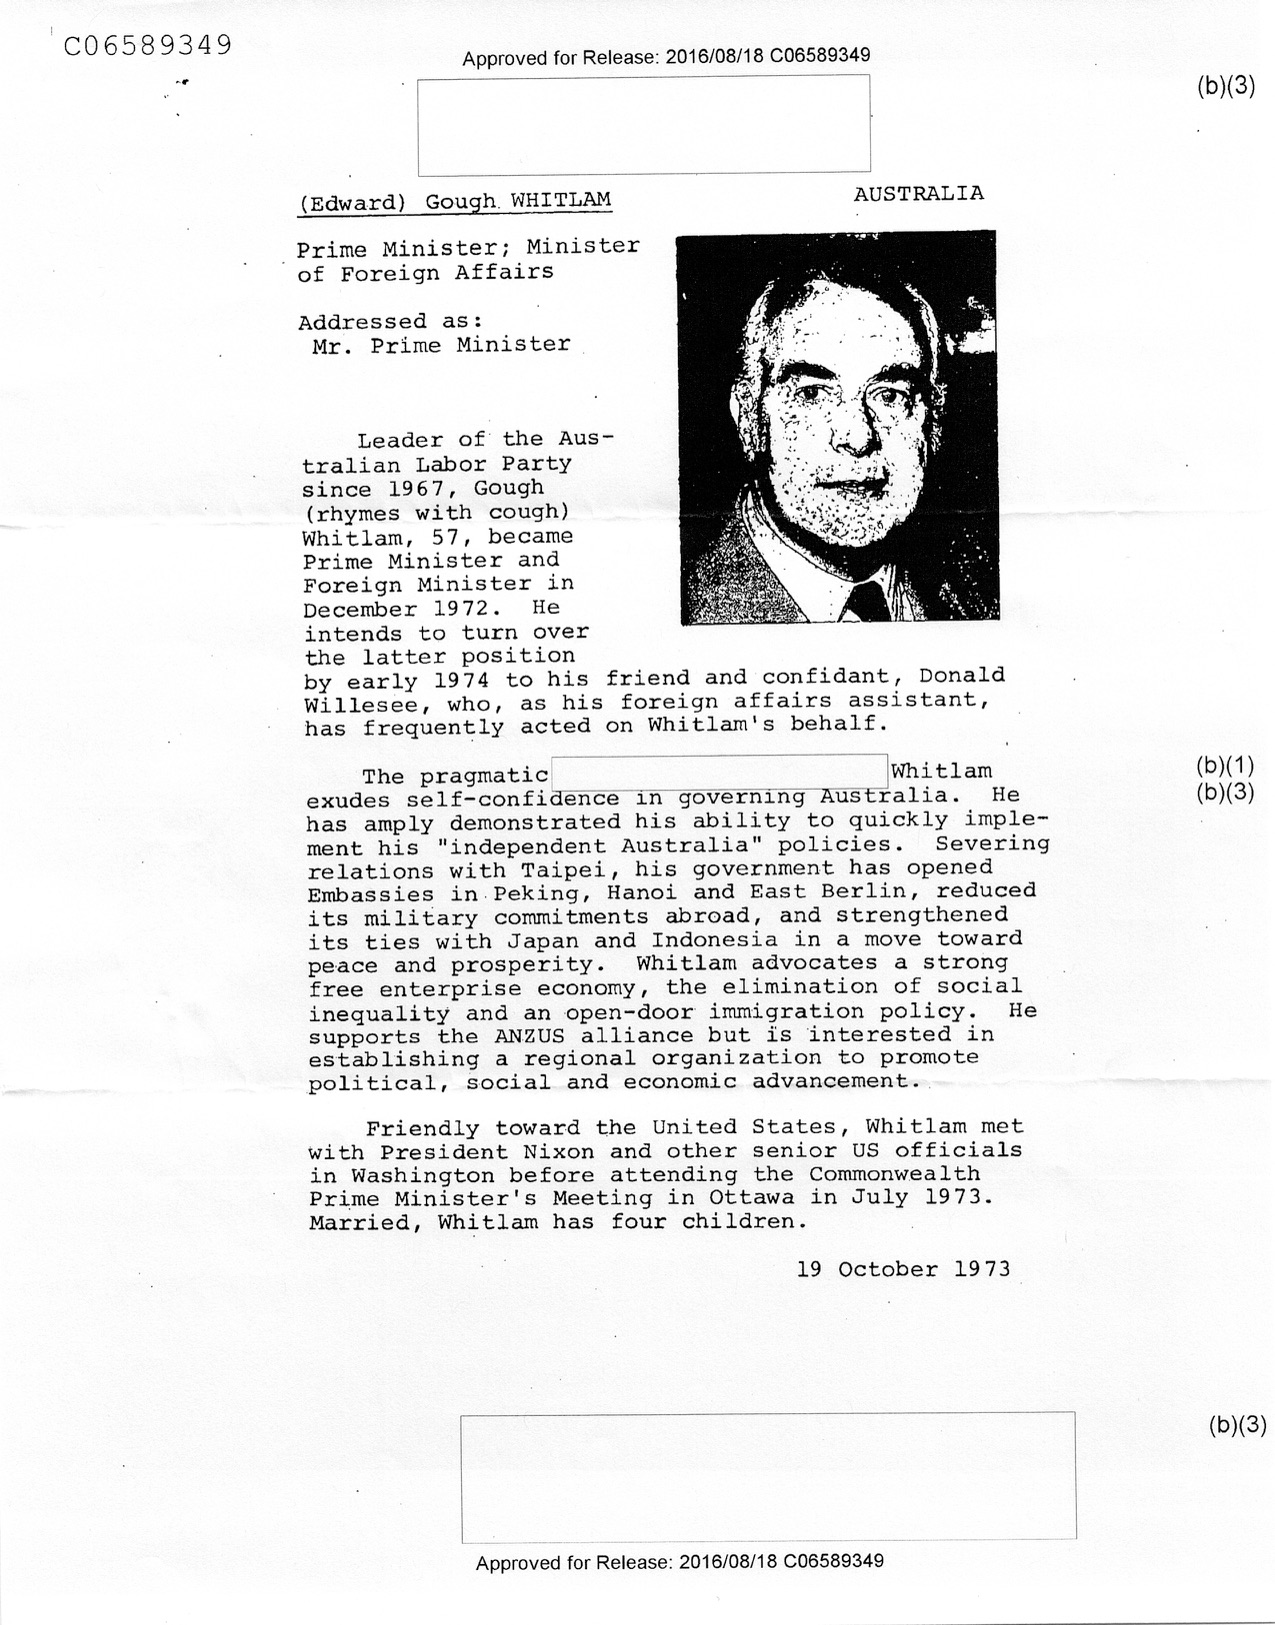 What The CIA Said About Australian Prime Minister Gough Whitlam Before He Was Ousted